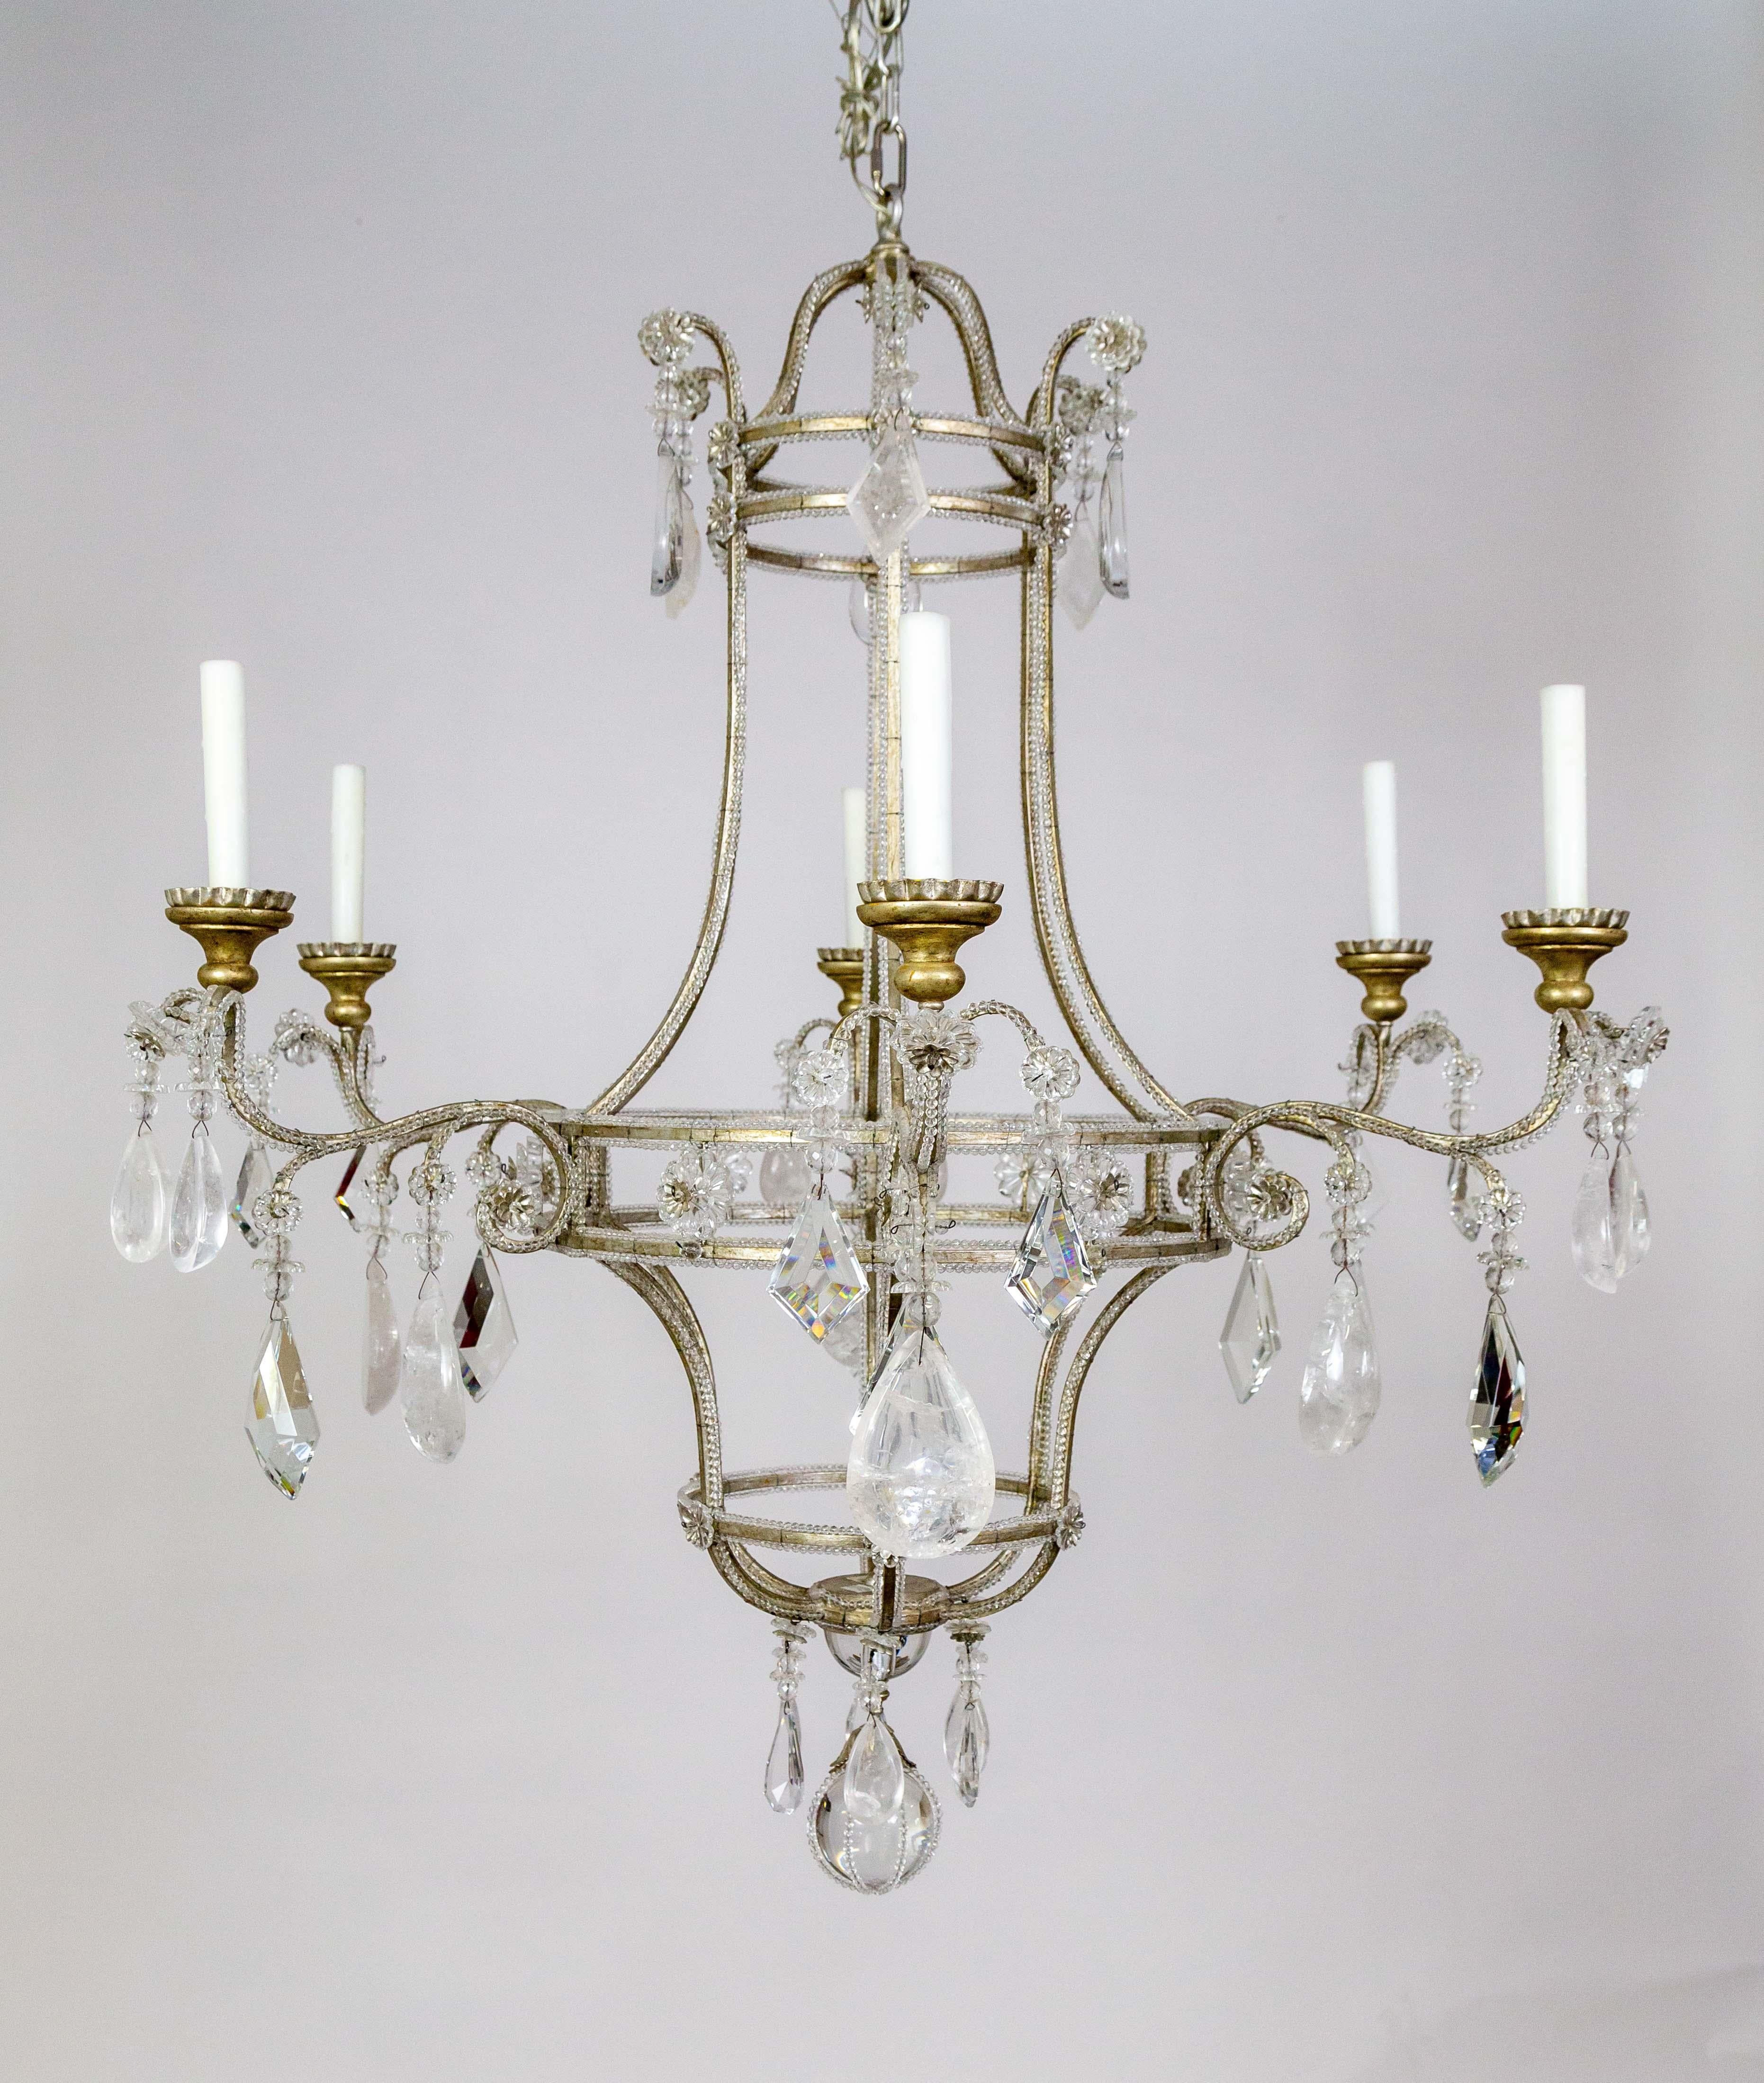 A large, birdcage style, 6-arm chandelier in silver leafed finish with an open, airy design by Dennis & Leen.  Its silvered, iron frame is lined with small crystal beads and adorned with large crystal and rock crystal drops, rosettes, and kites.